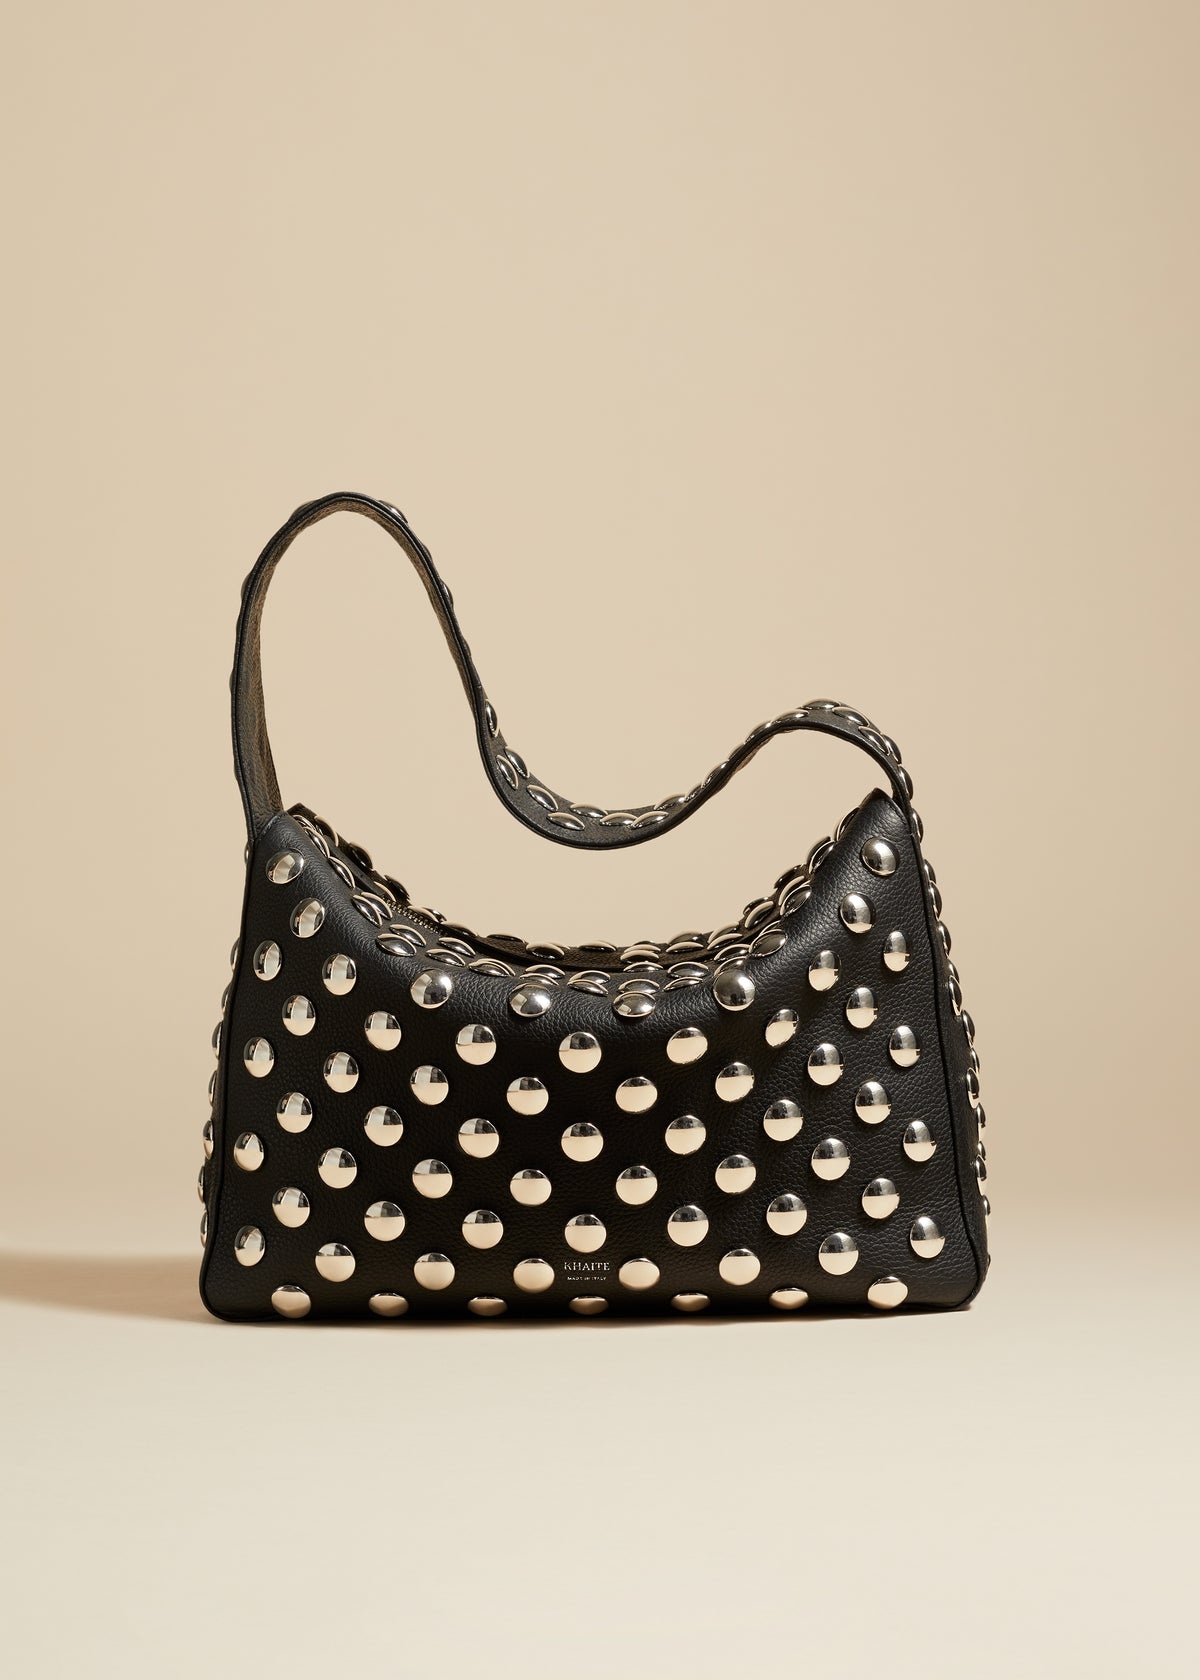 The Elena Bag in Black Leather with Studs - 1